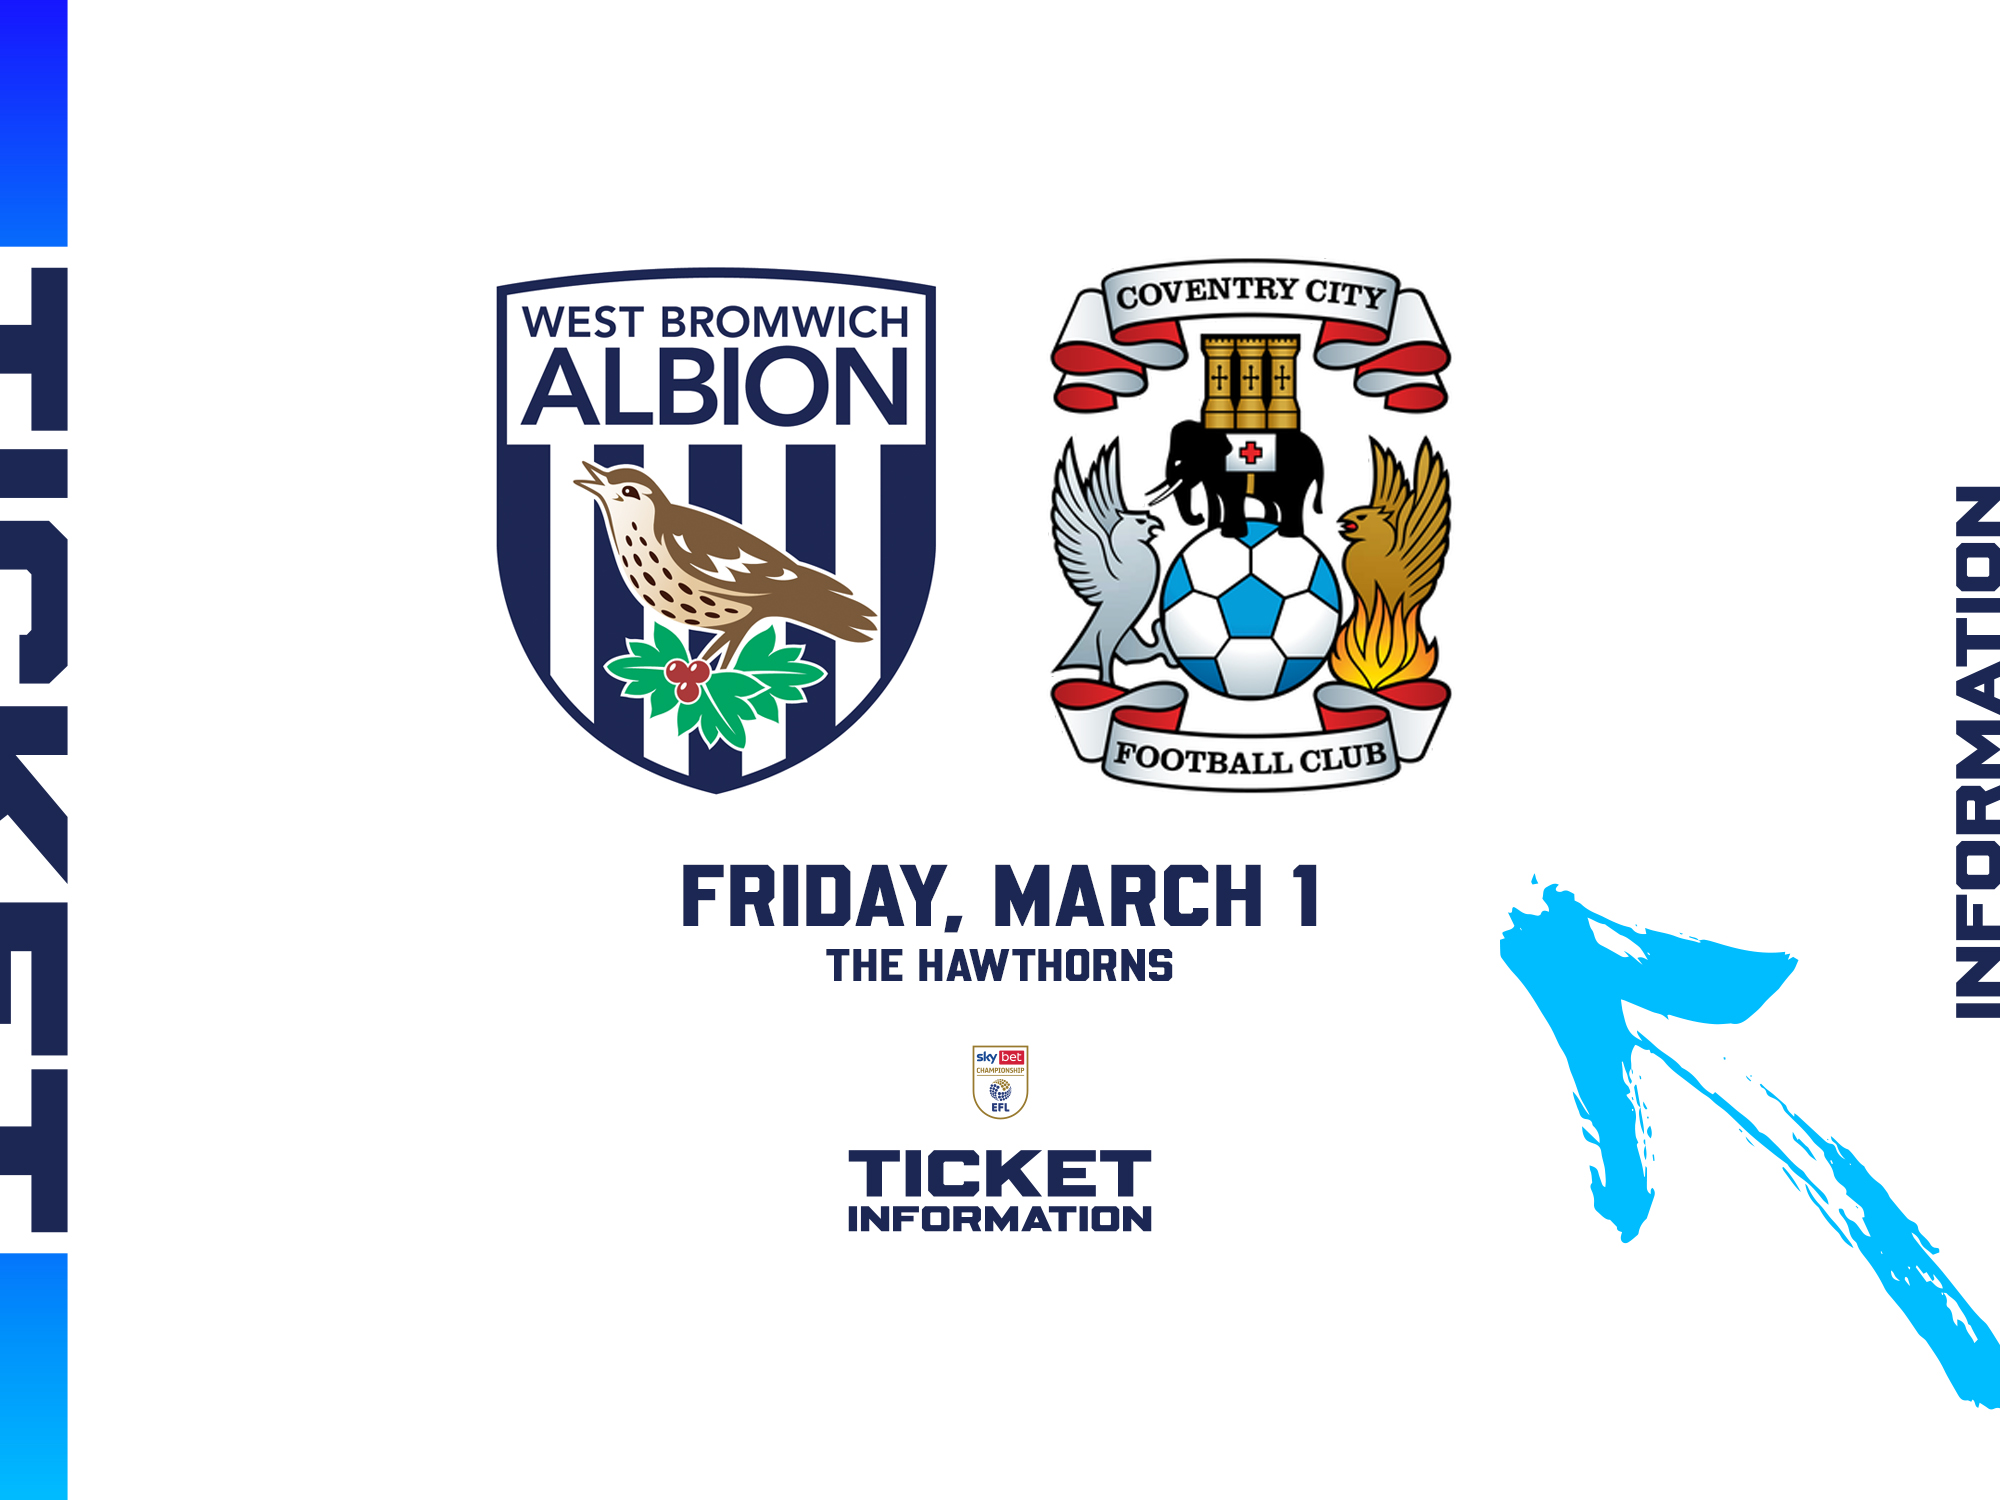 A ticket graphic displaying information for Albion's game against Coventry